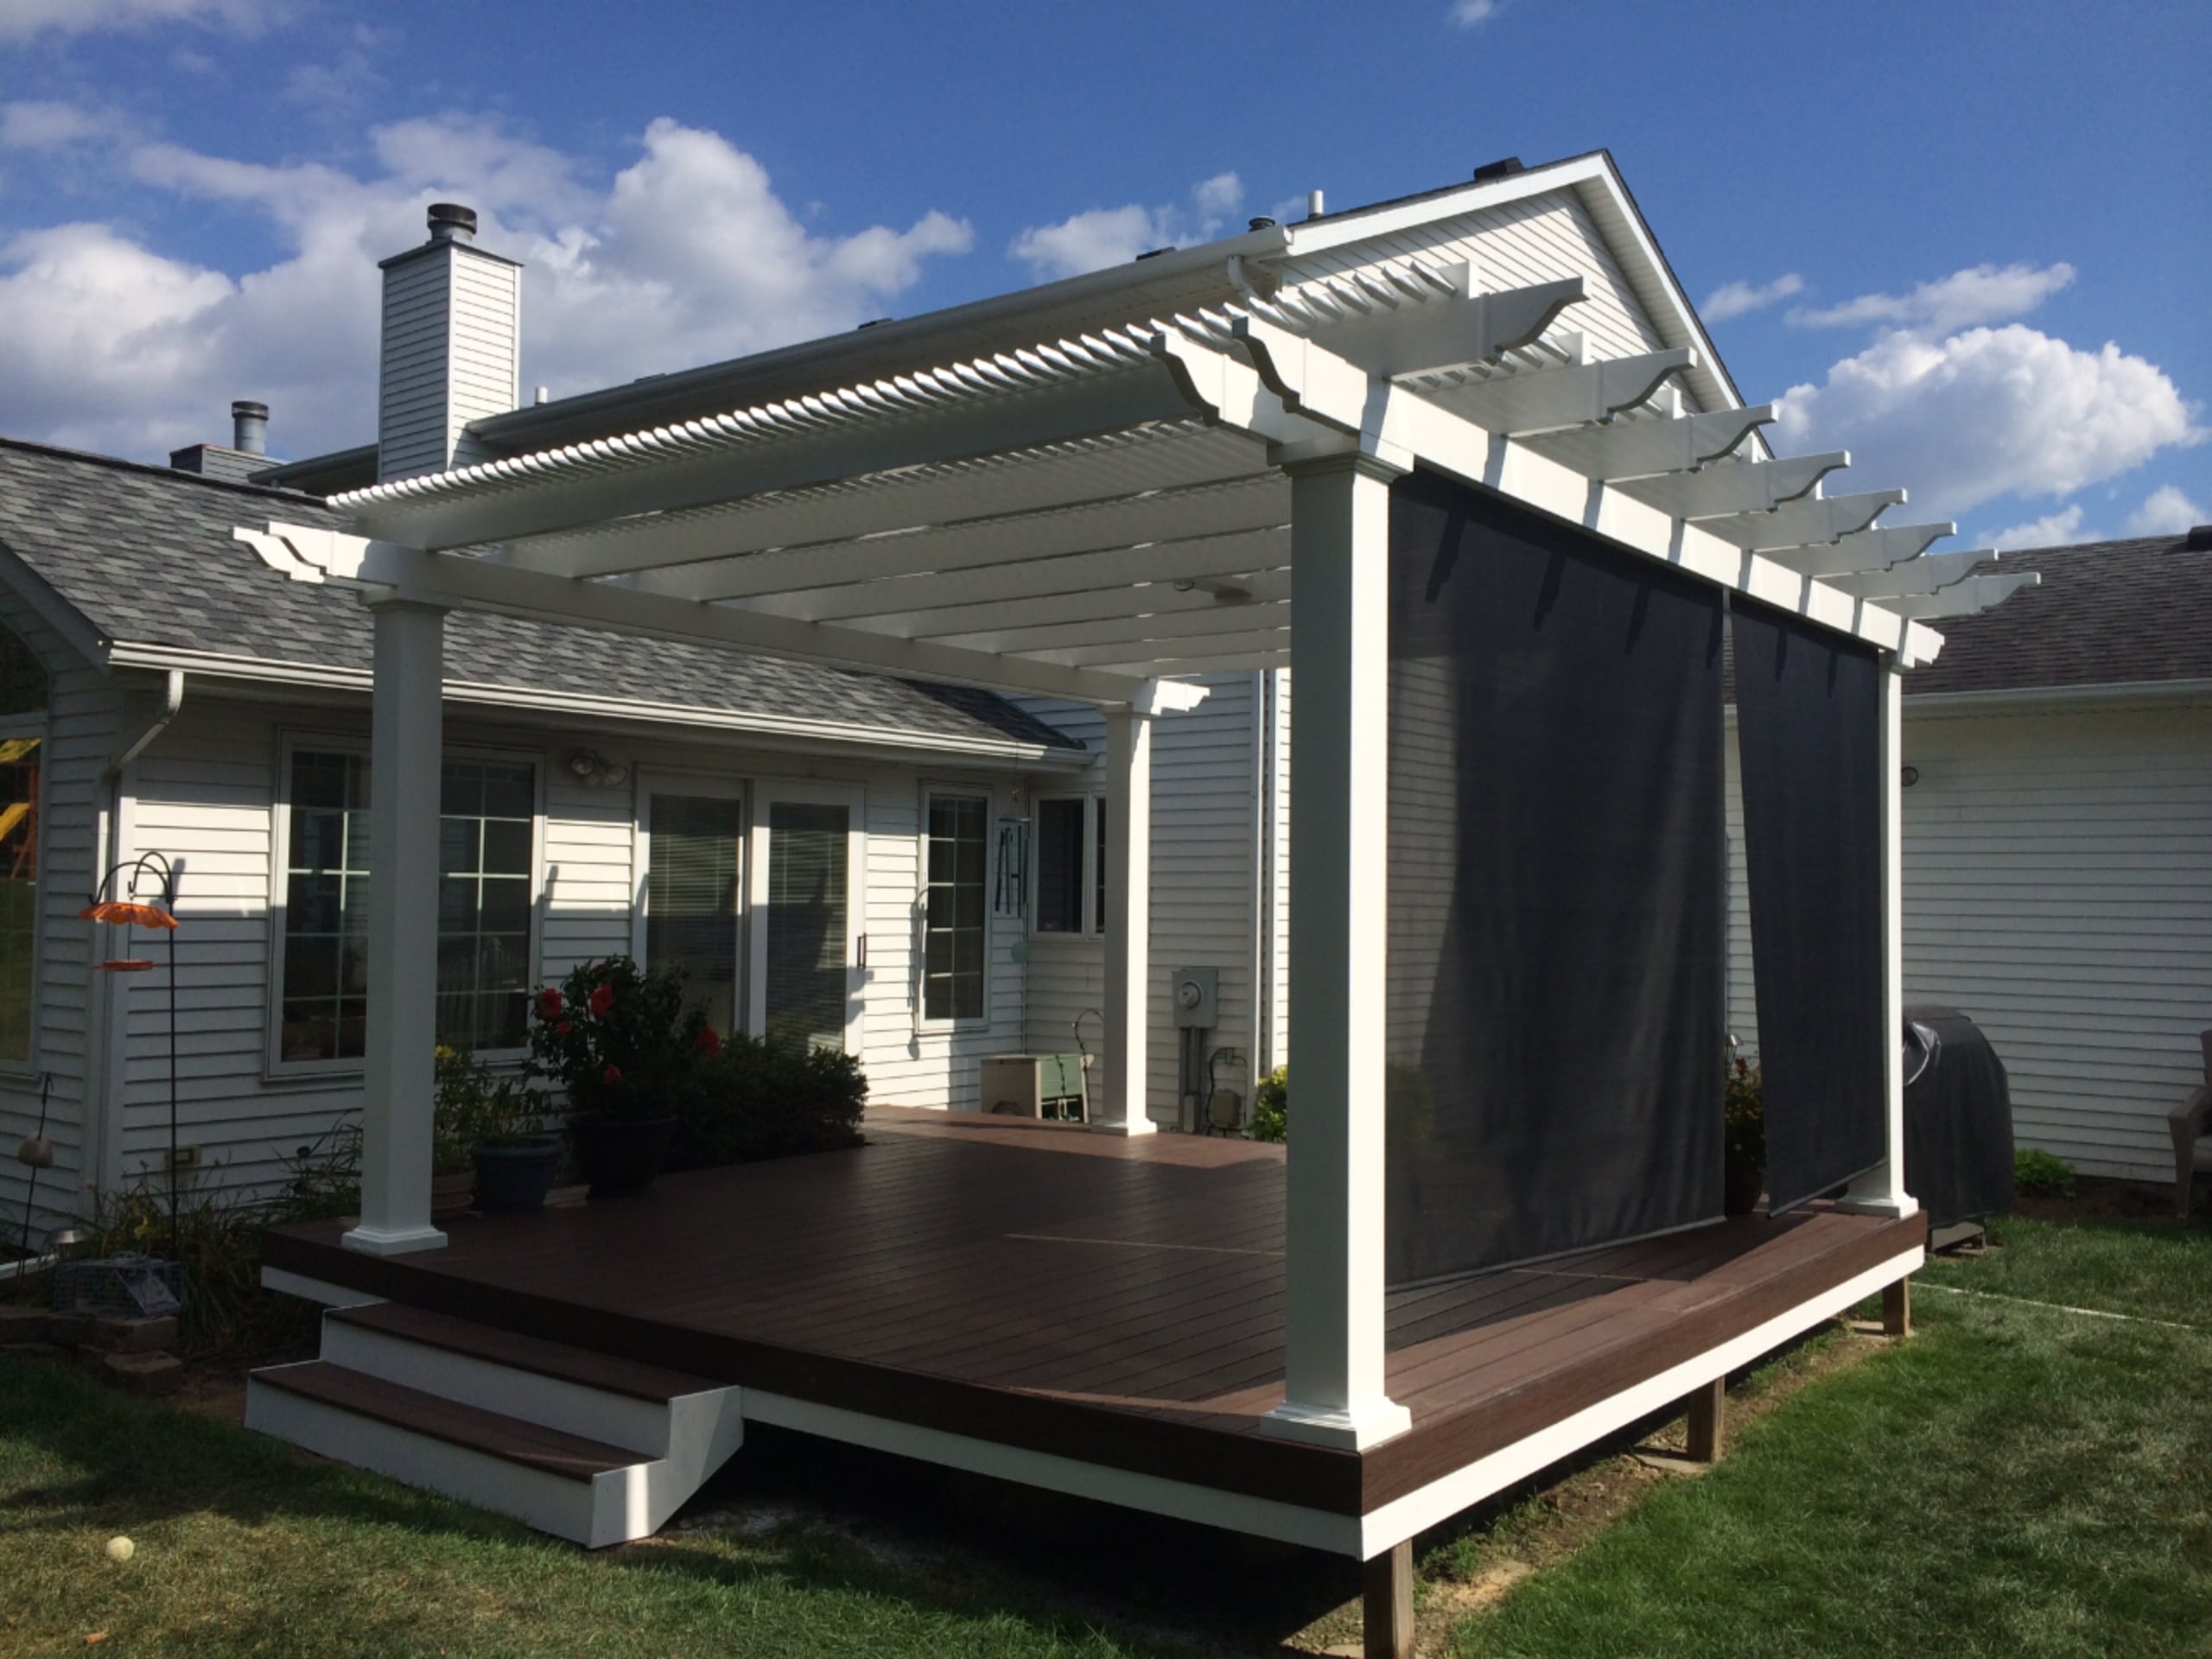 This home has a back decking area with a white pergola attached. There is a screen on the side of the pergola, and there is no furniture on the deck under the pergola.